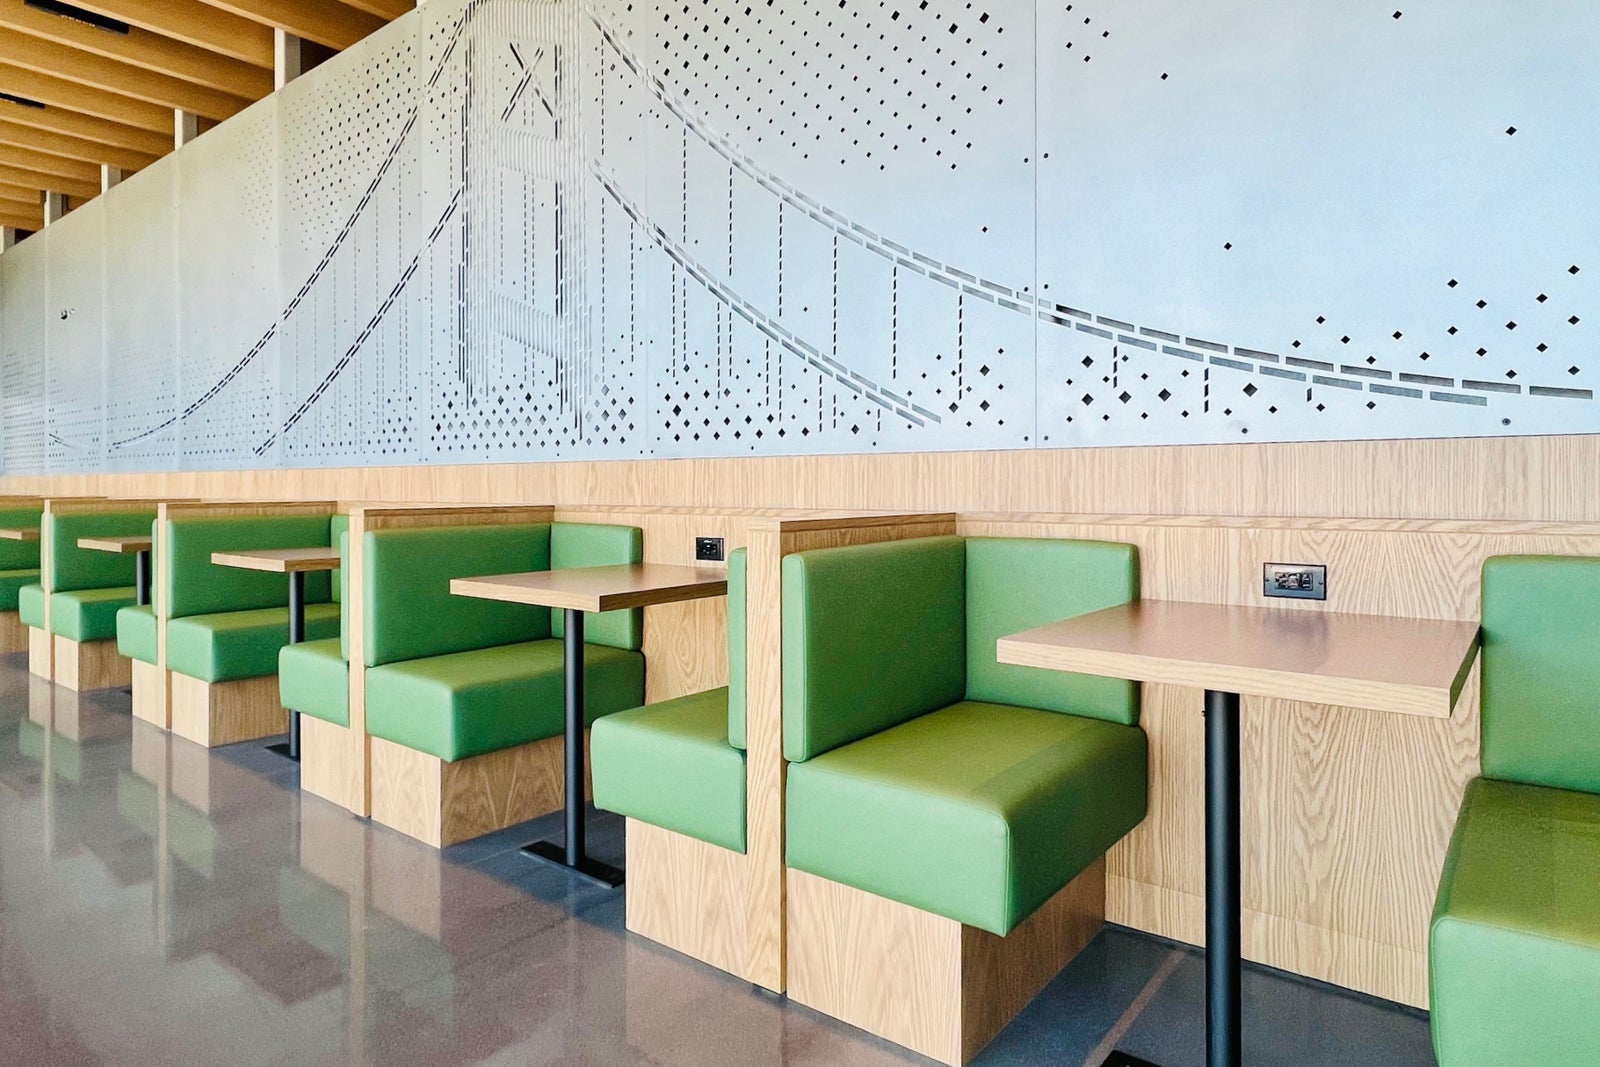 Alaska Airways opened a brand new lounge at SFO — this is what to know